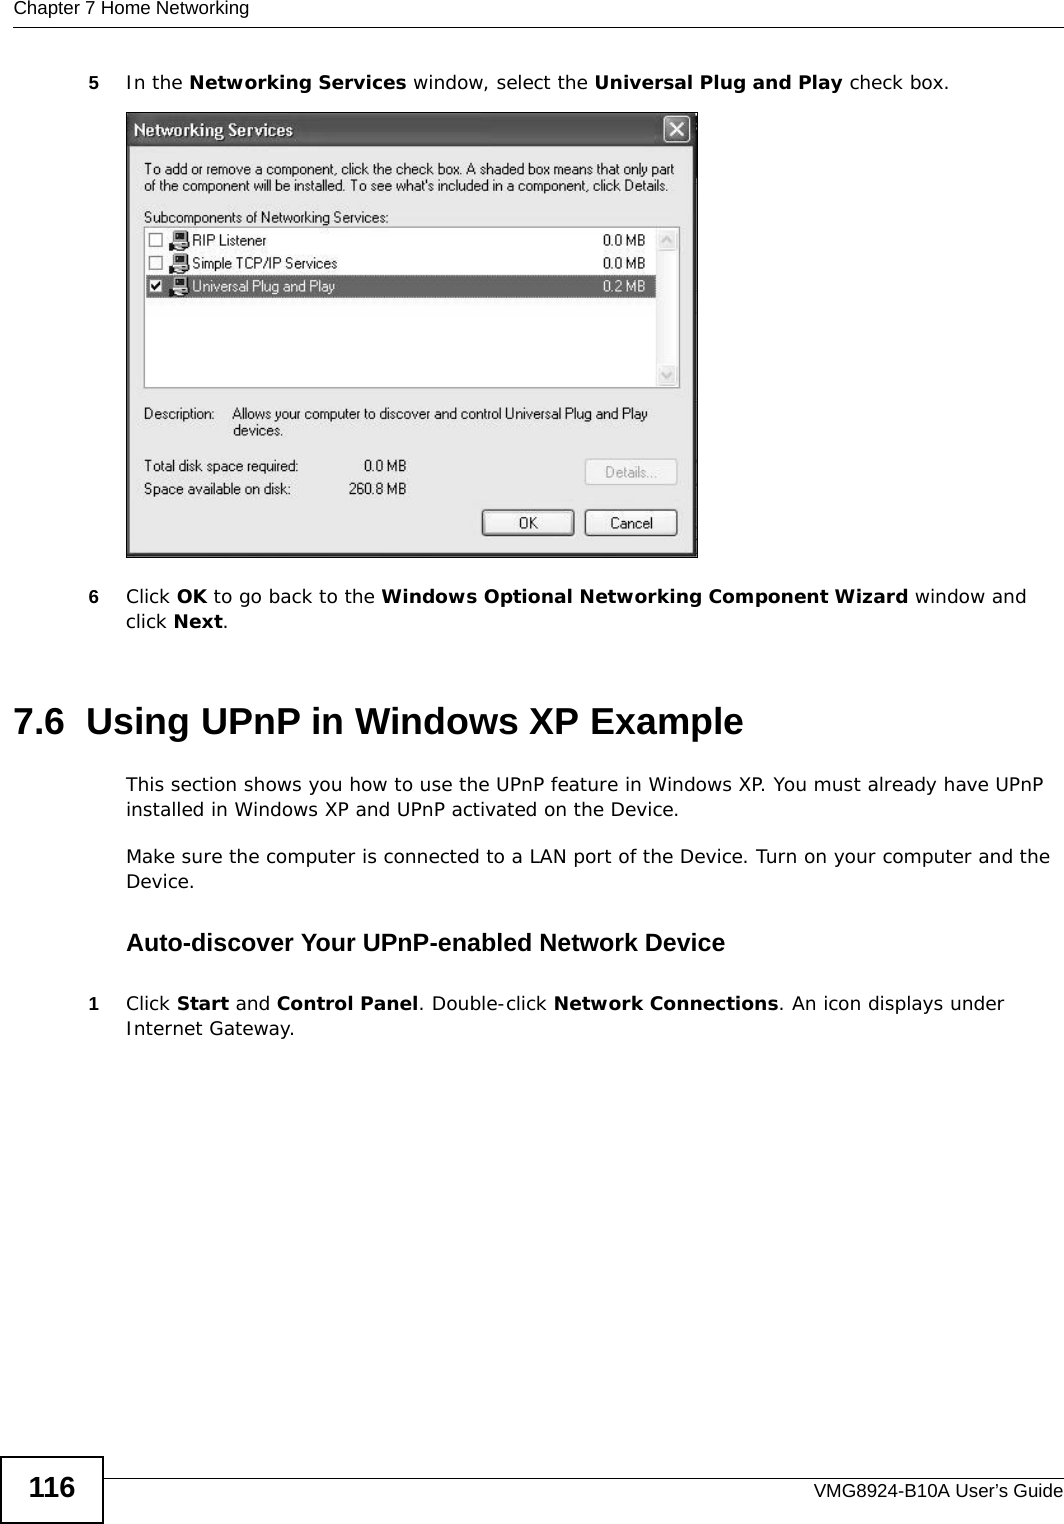 Chapter 7 Home NetworkingVMG8924-B10A User’s Guide1165In the Networking Services window, select the Universal Plug and Play check box. Networking Services6Click OK to go back to the Windows Optional Networking Component Wizard window and click Next. 7.6  Using UPnP in Windows XP ExampleThis section shows you how to use the UPnP feature in Windows XP. You must already have UPnP installed in Windows XP and UPnP activated on the Device.Make sure the computer is connected to a LAN port of the Device. Turn on your computer and the Device. Auto-discover Your UPnP-enabled Network Device1Click Start and Control Panel. Double-click Network Connections. An icon displays under Internet Gateway.